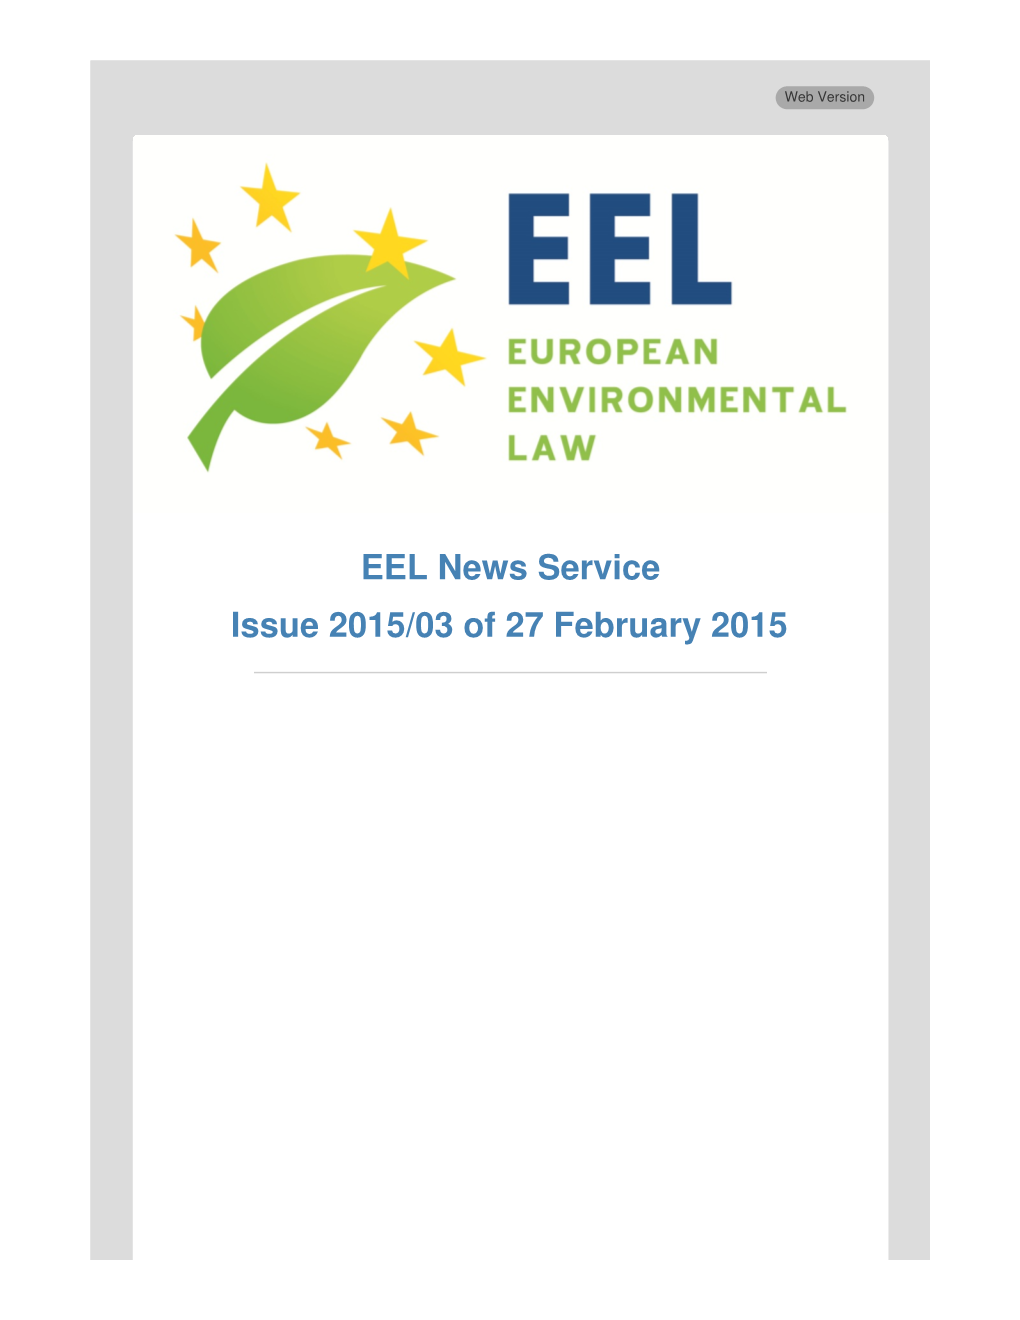 EEL News Service Issue 2015/03 of 27 February 2015 Dear Members of the EEL Network